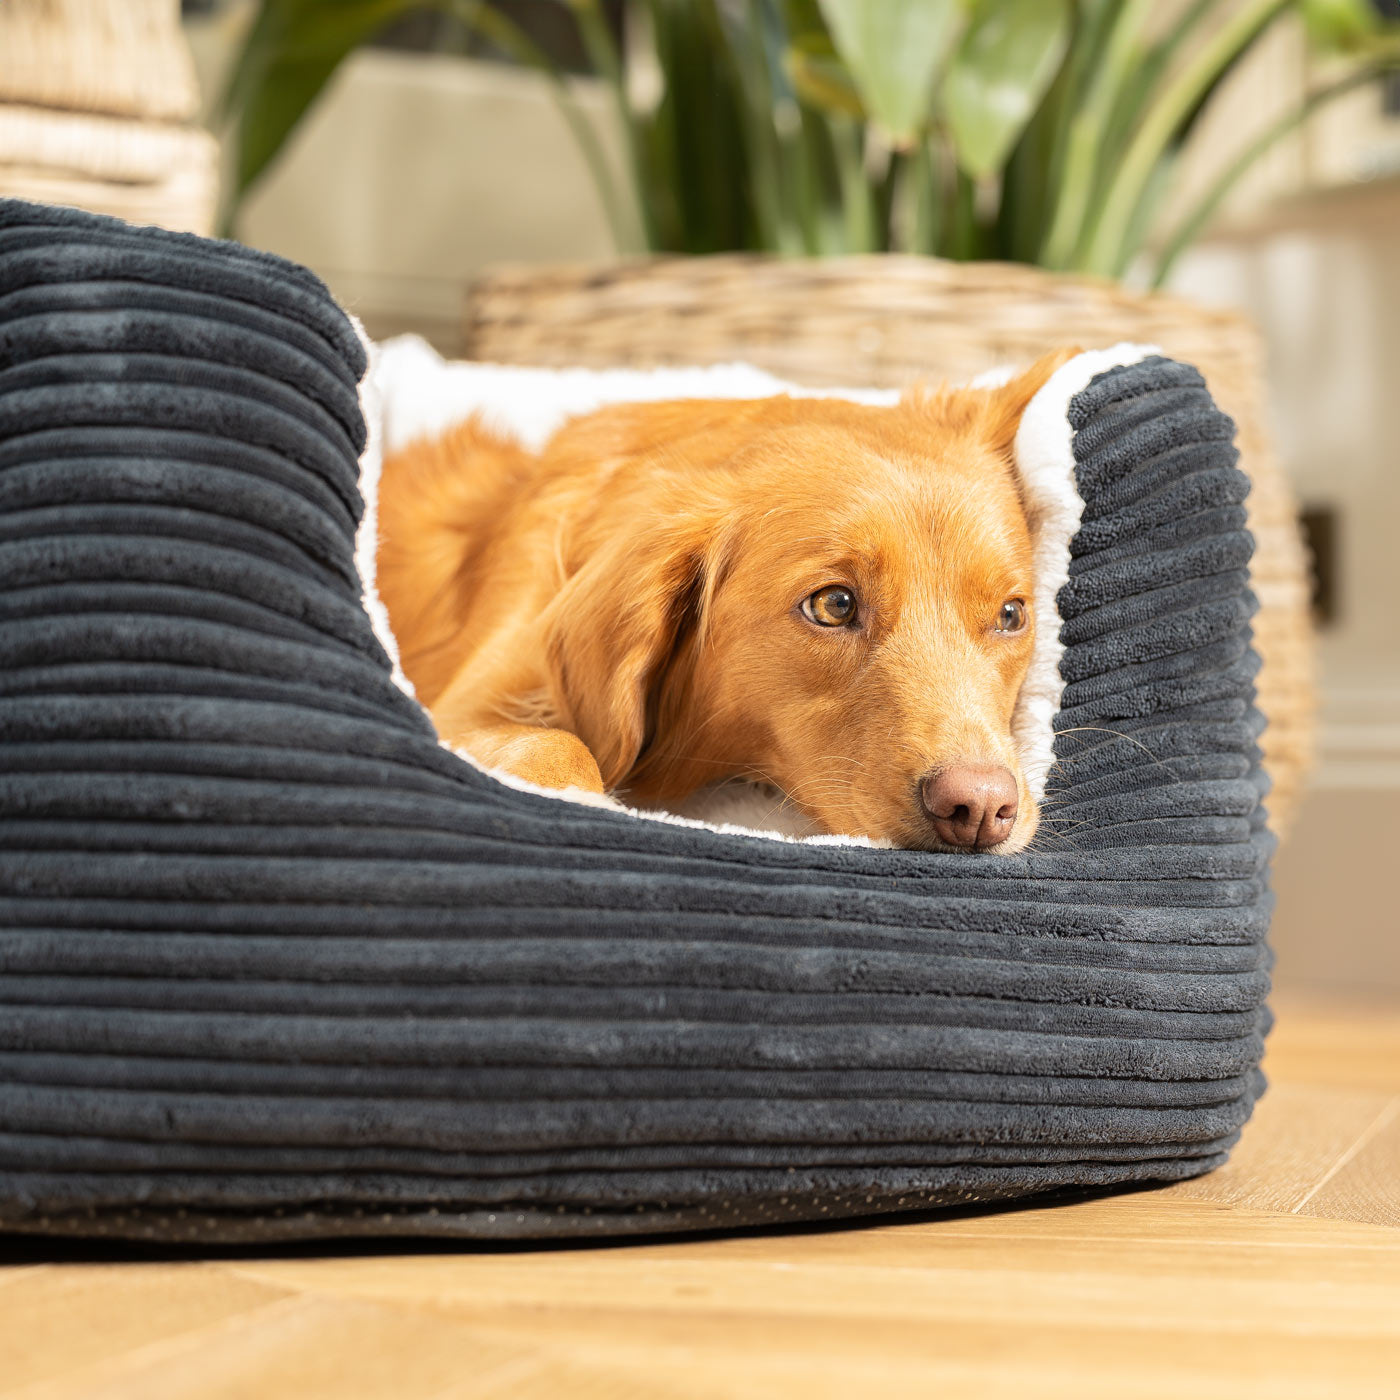 Discover Our Luxurious High Wall Bed For Dogs, Featuring inner pillow with plush teddy fleece on one side To Craft The Perfect Dog Bed In Stunning Essentials Navy Plush! Available To Personalize Now at Lords & Labradors US